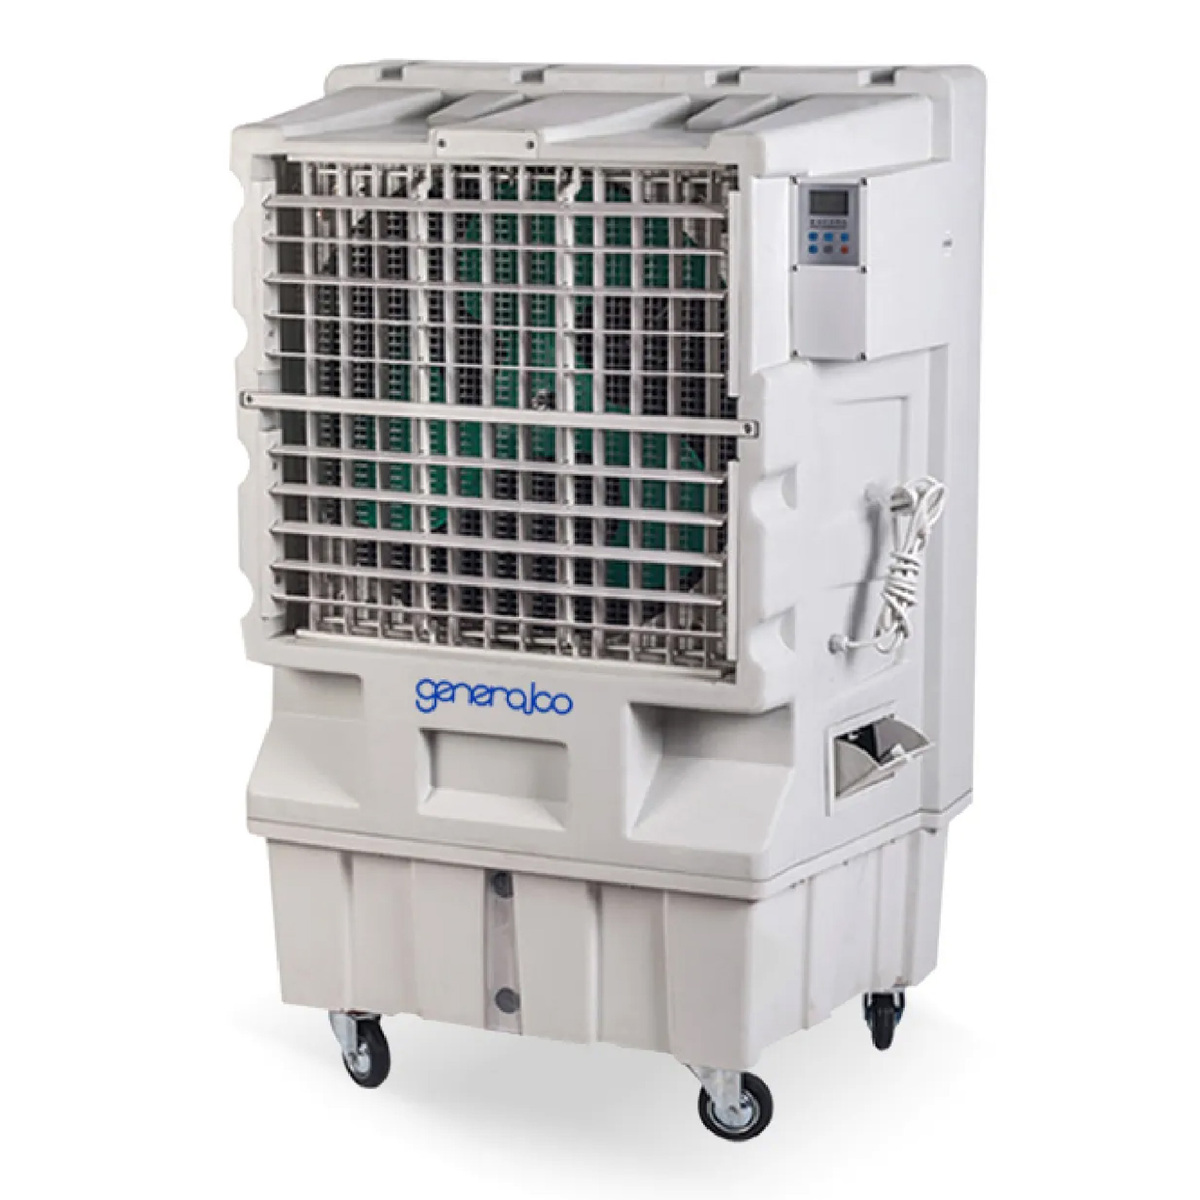 General Cool Generalco Air Cooler HNY12 65Ltr